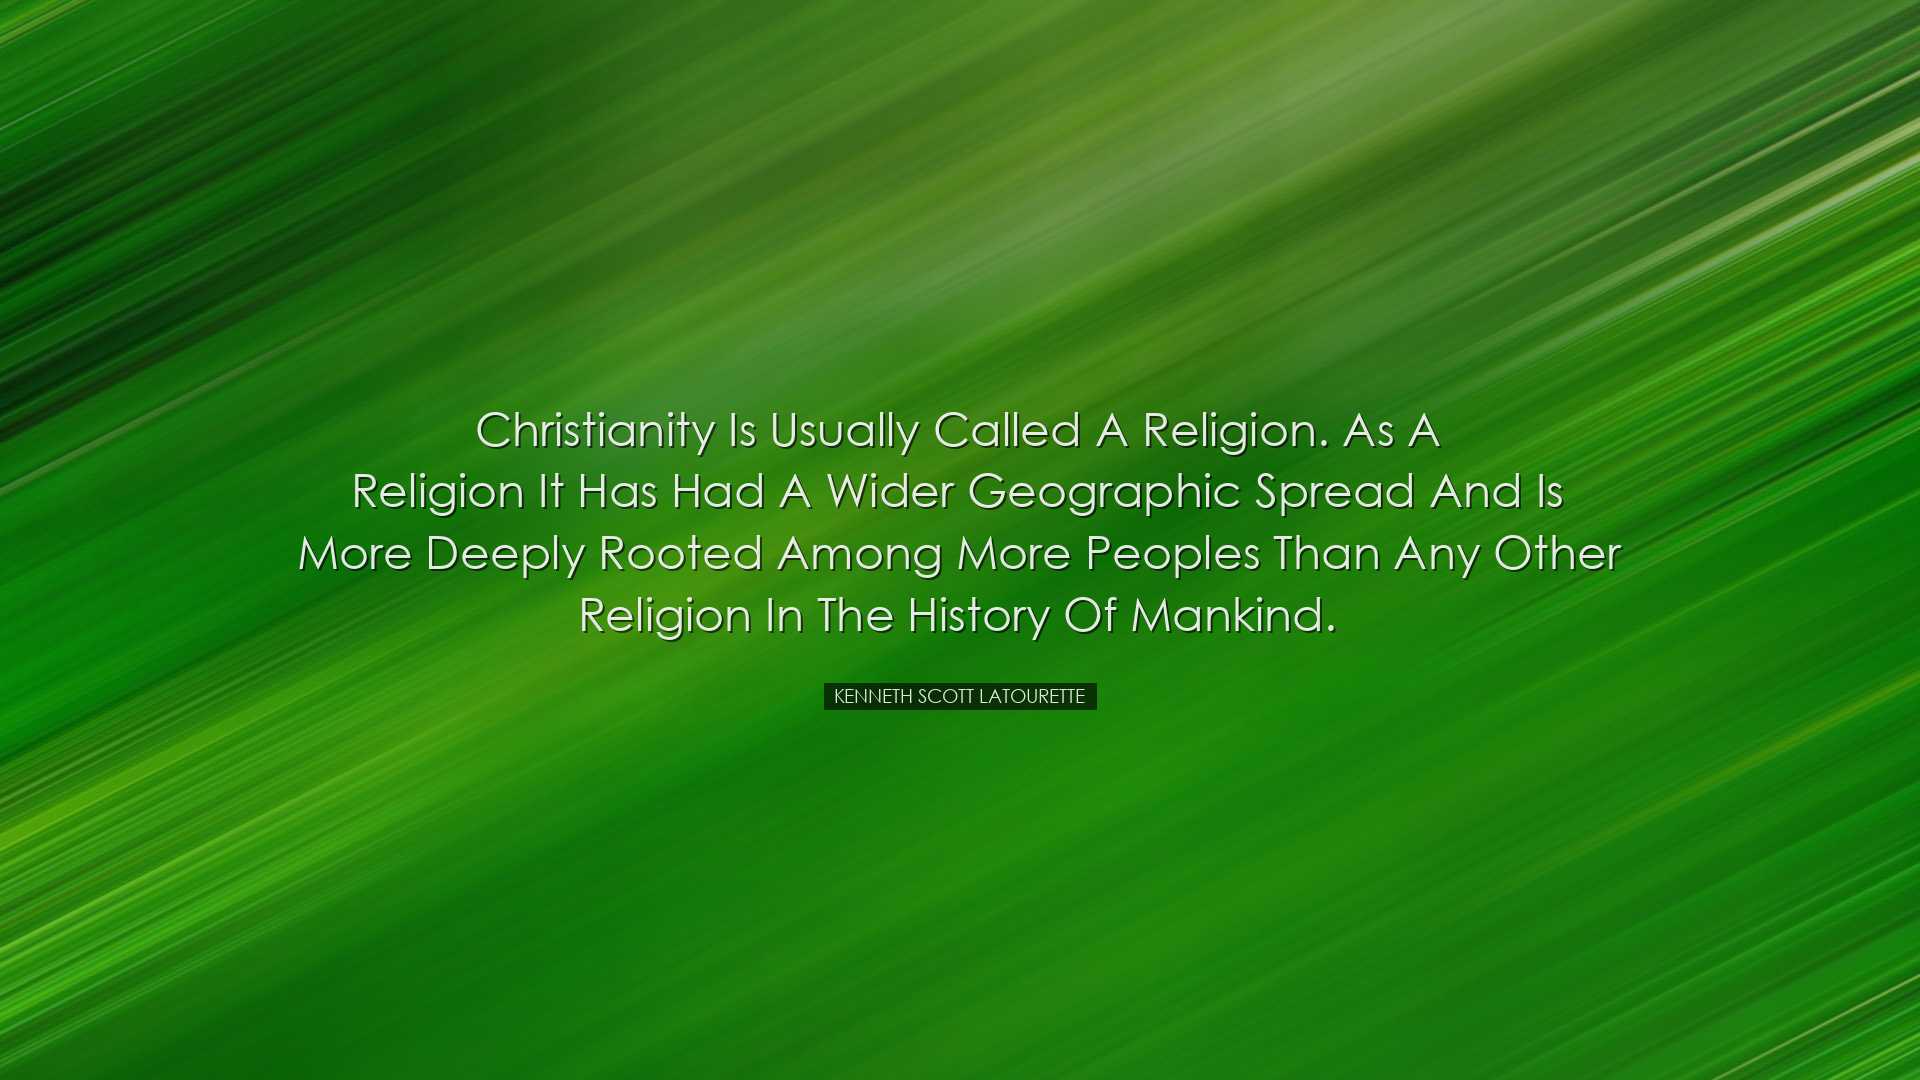 Christianity is usually called a religion. As a religion it has ha